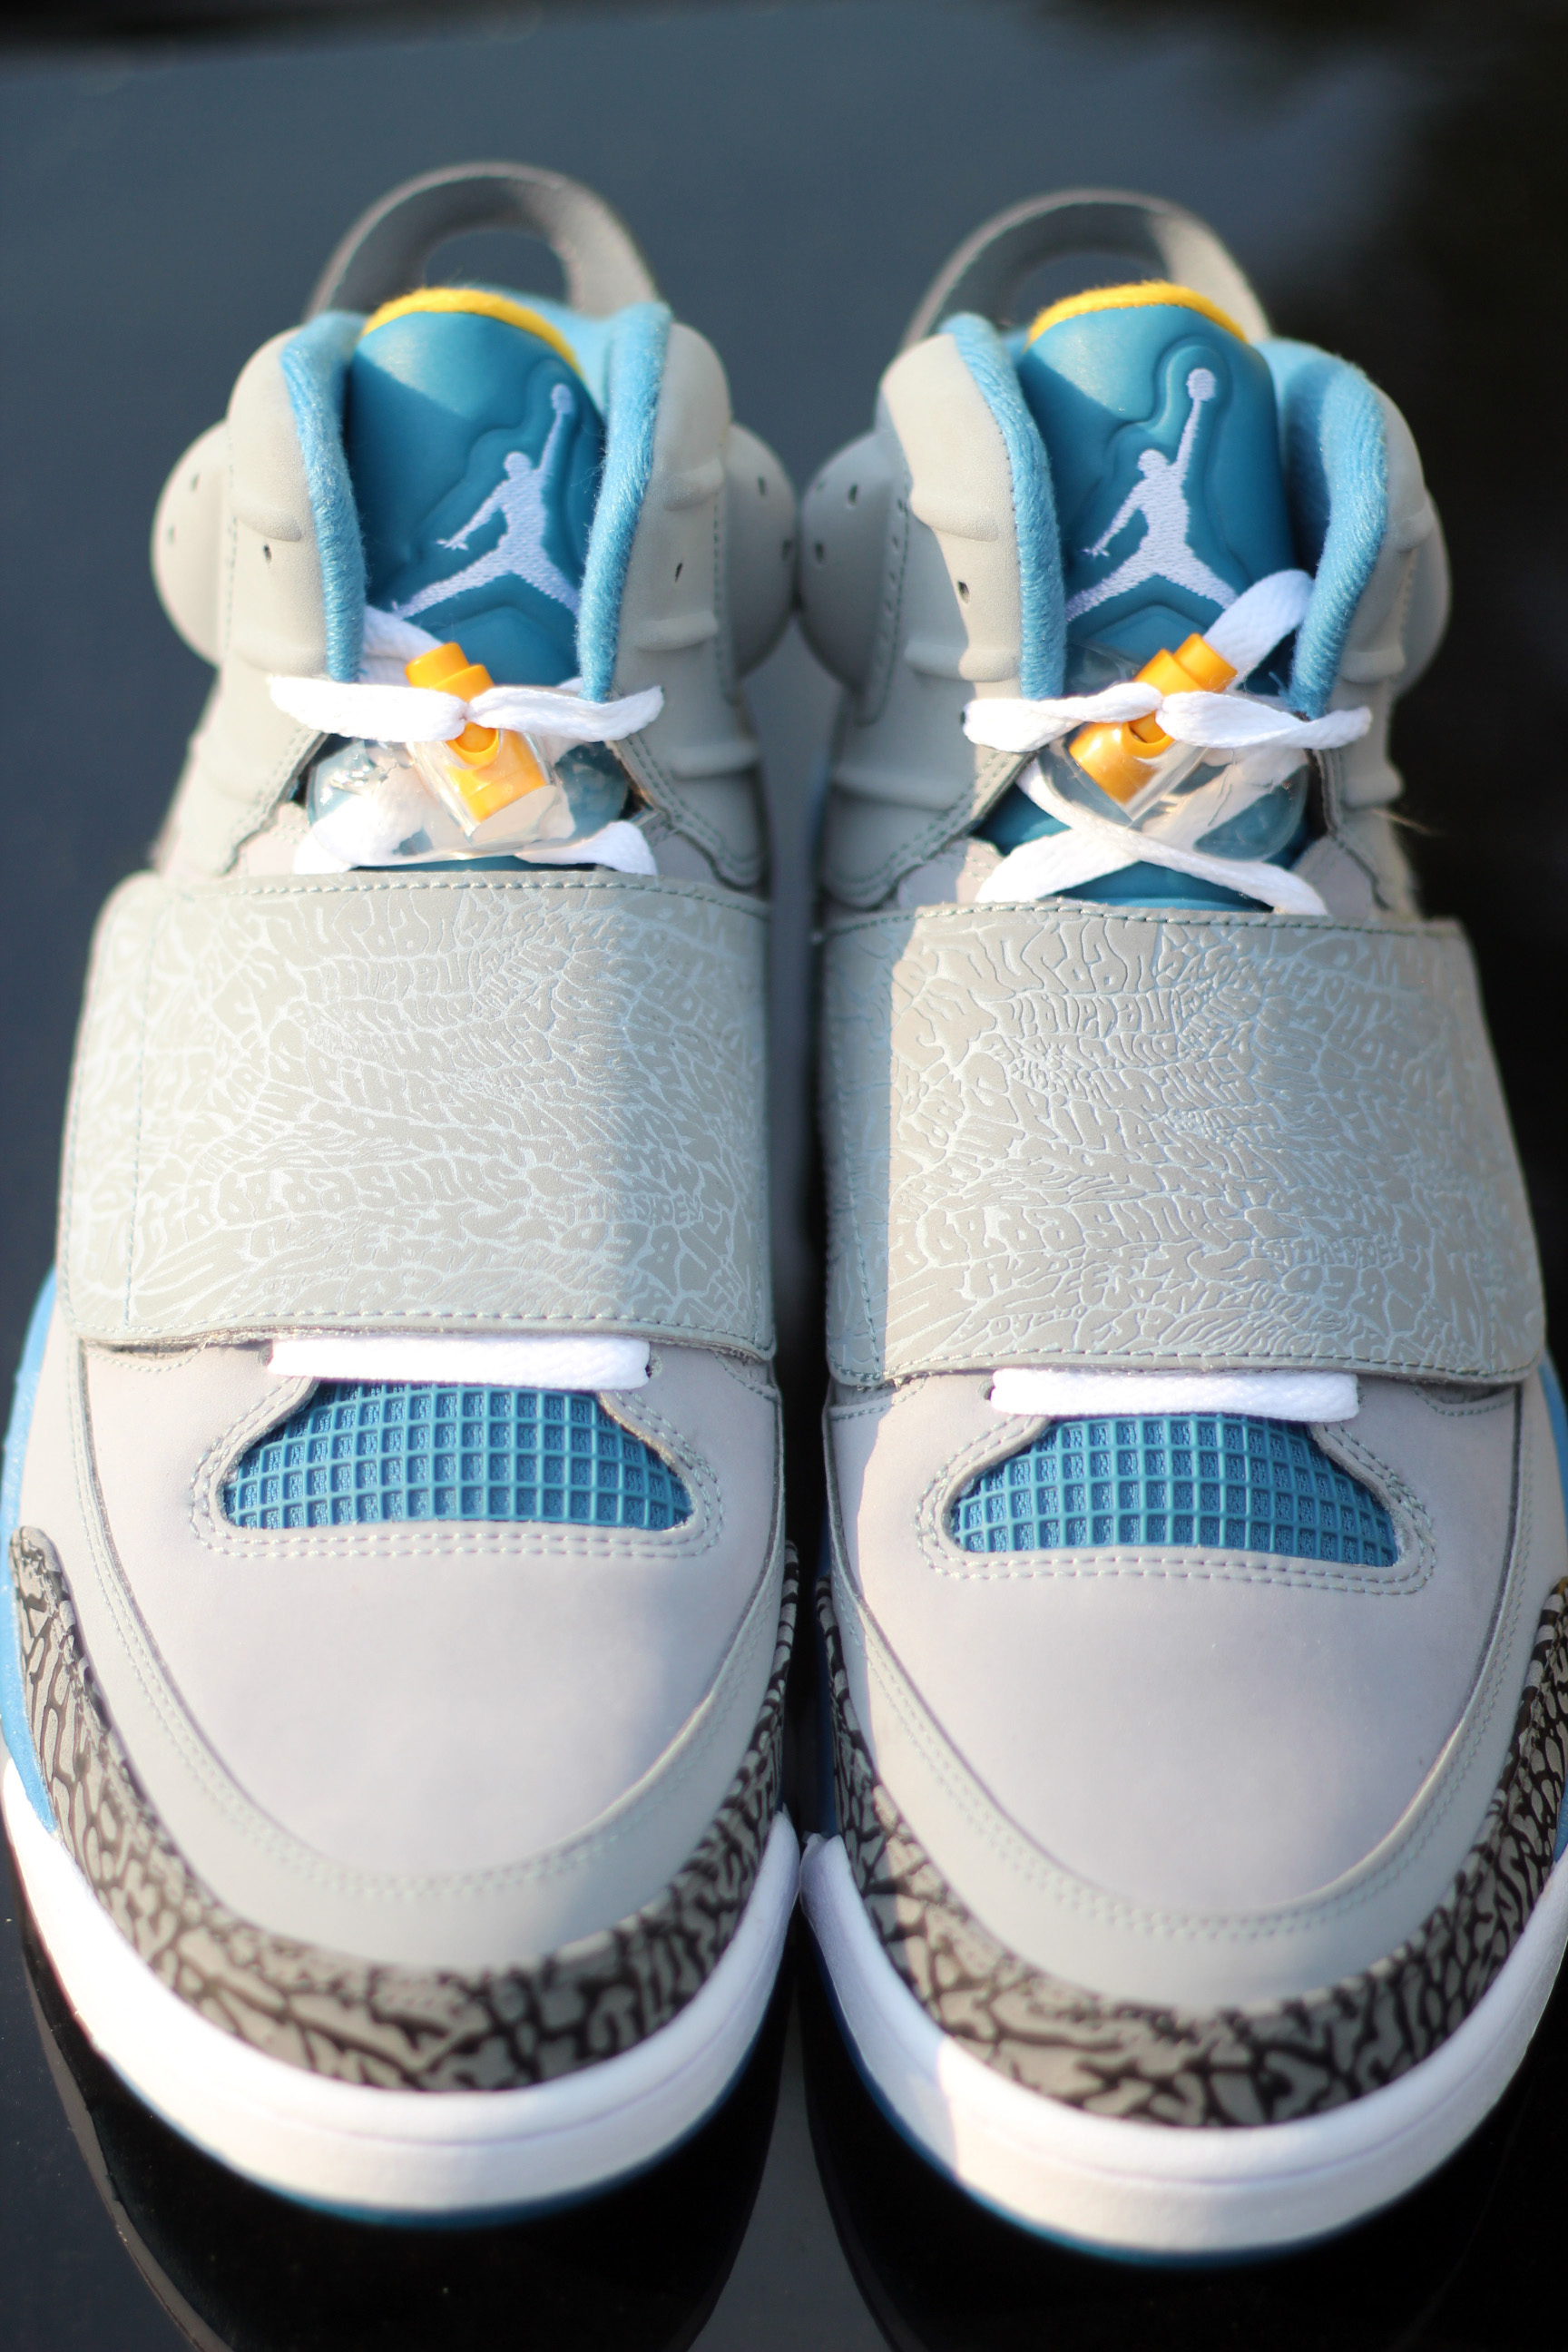 Jordan Son of Mars - Stealth/White-Shaded Blue - Official Photos